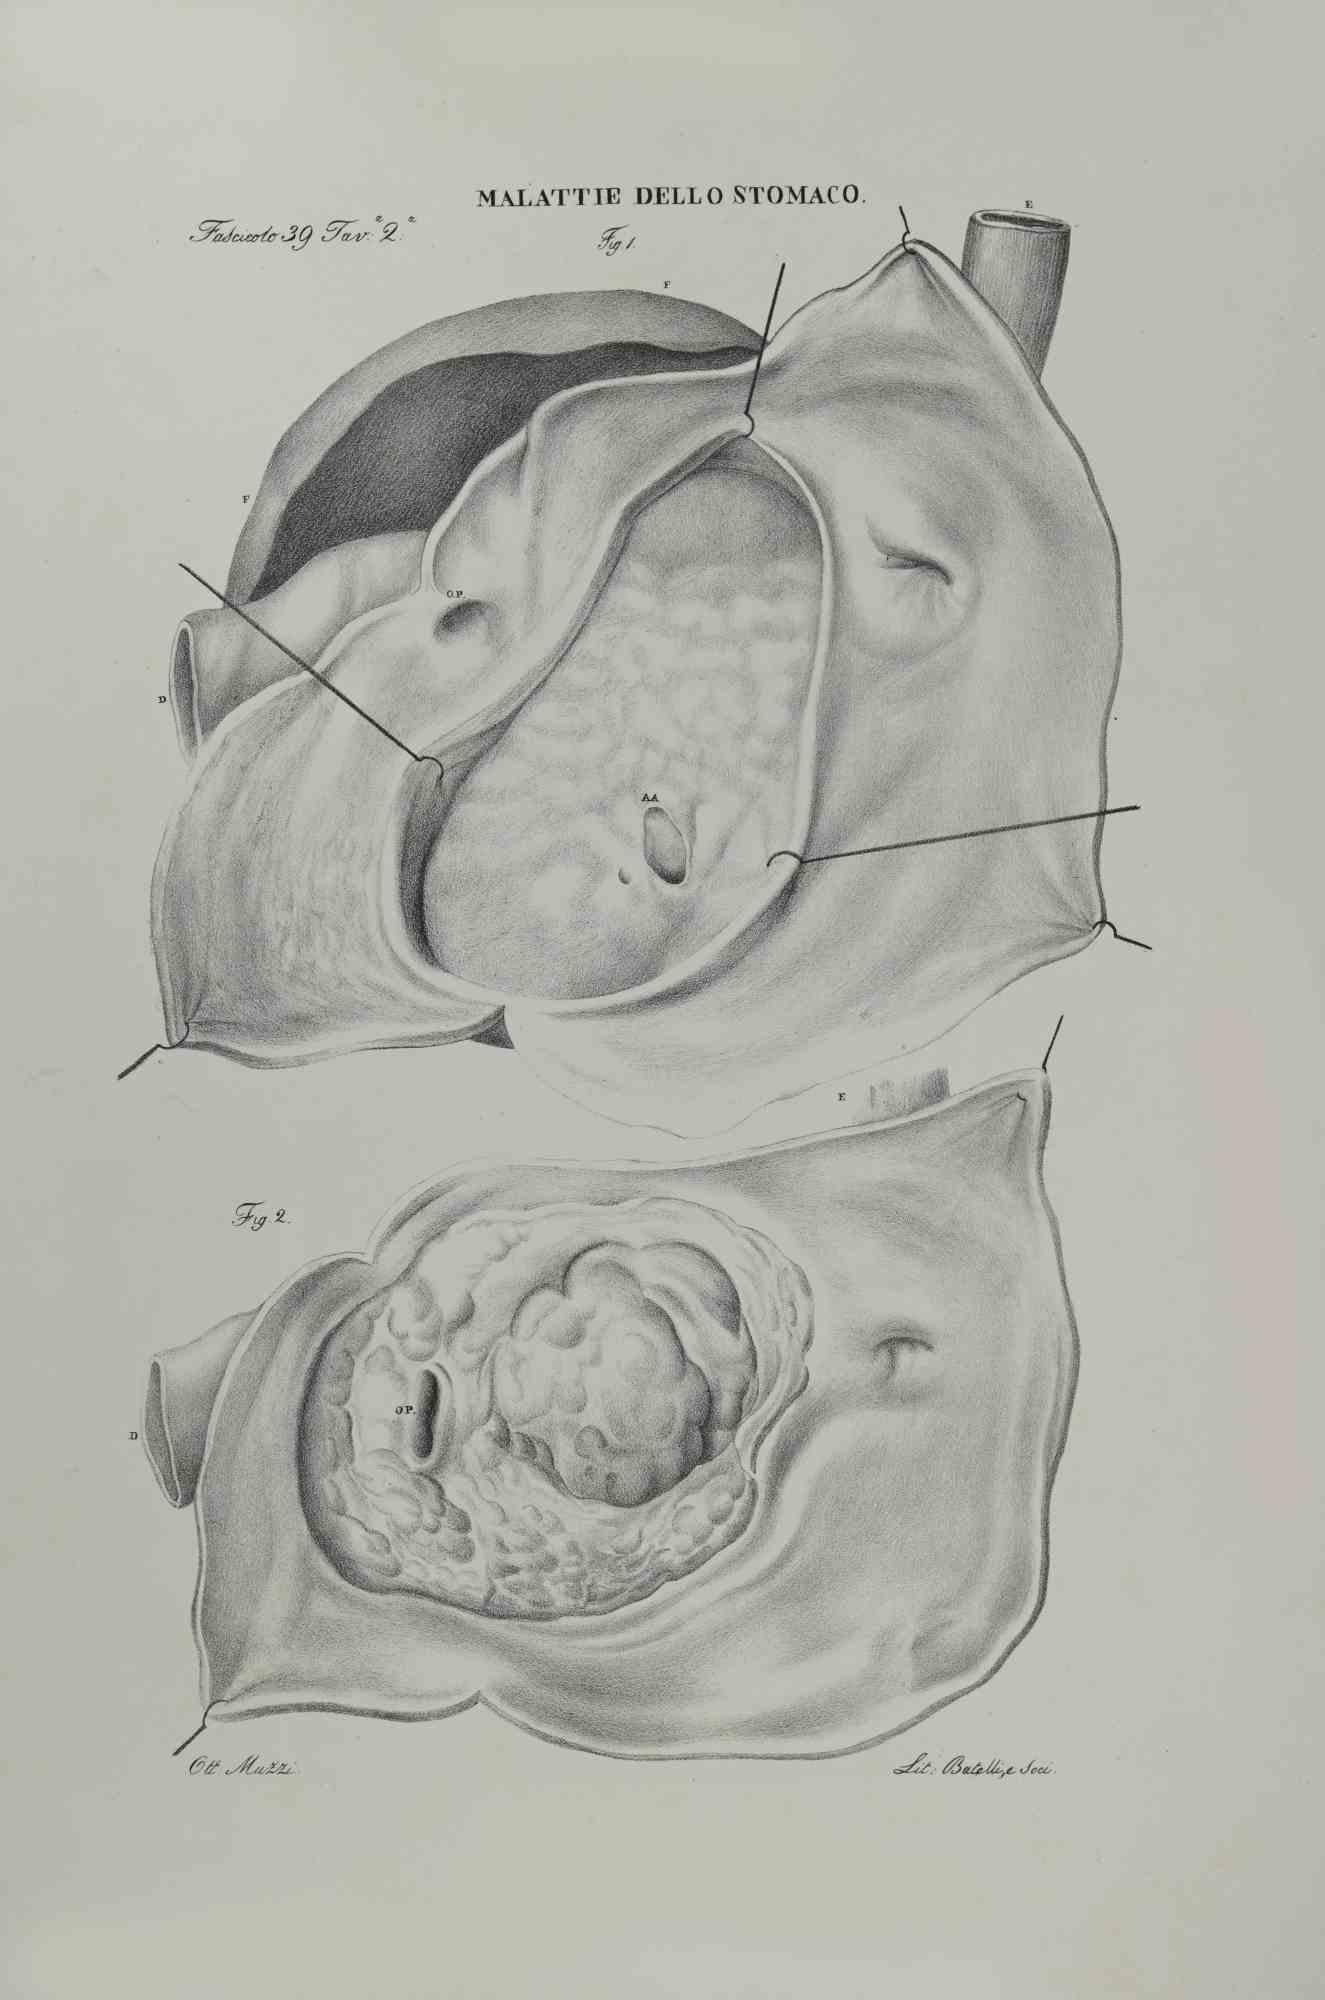 Stomach Diseases is a lithograph by Ottavio Muzzi for the edition of Antoine Chazal, Human Anatomy, Printers Batelli and Ridolfi, 1843.

The work belongs to the Atlante generale della anatomia patologica del corpo umano by Jean CRUVEILHIER,